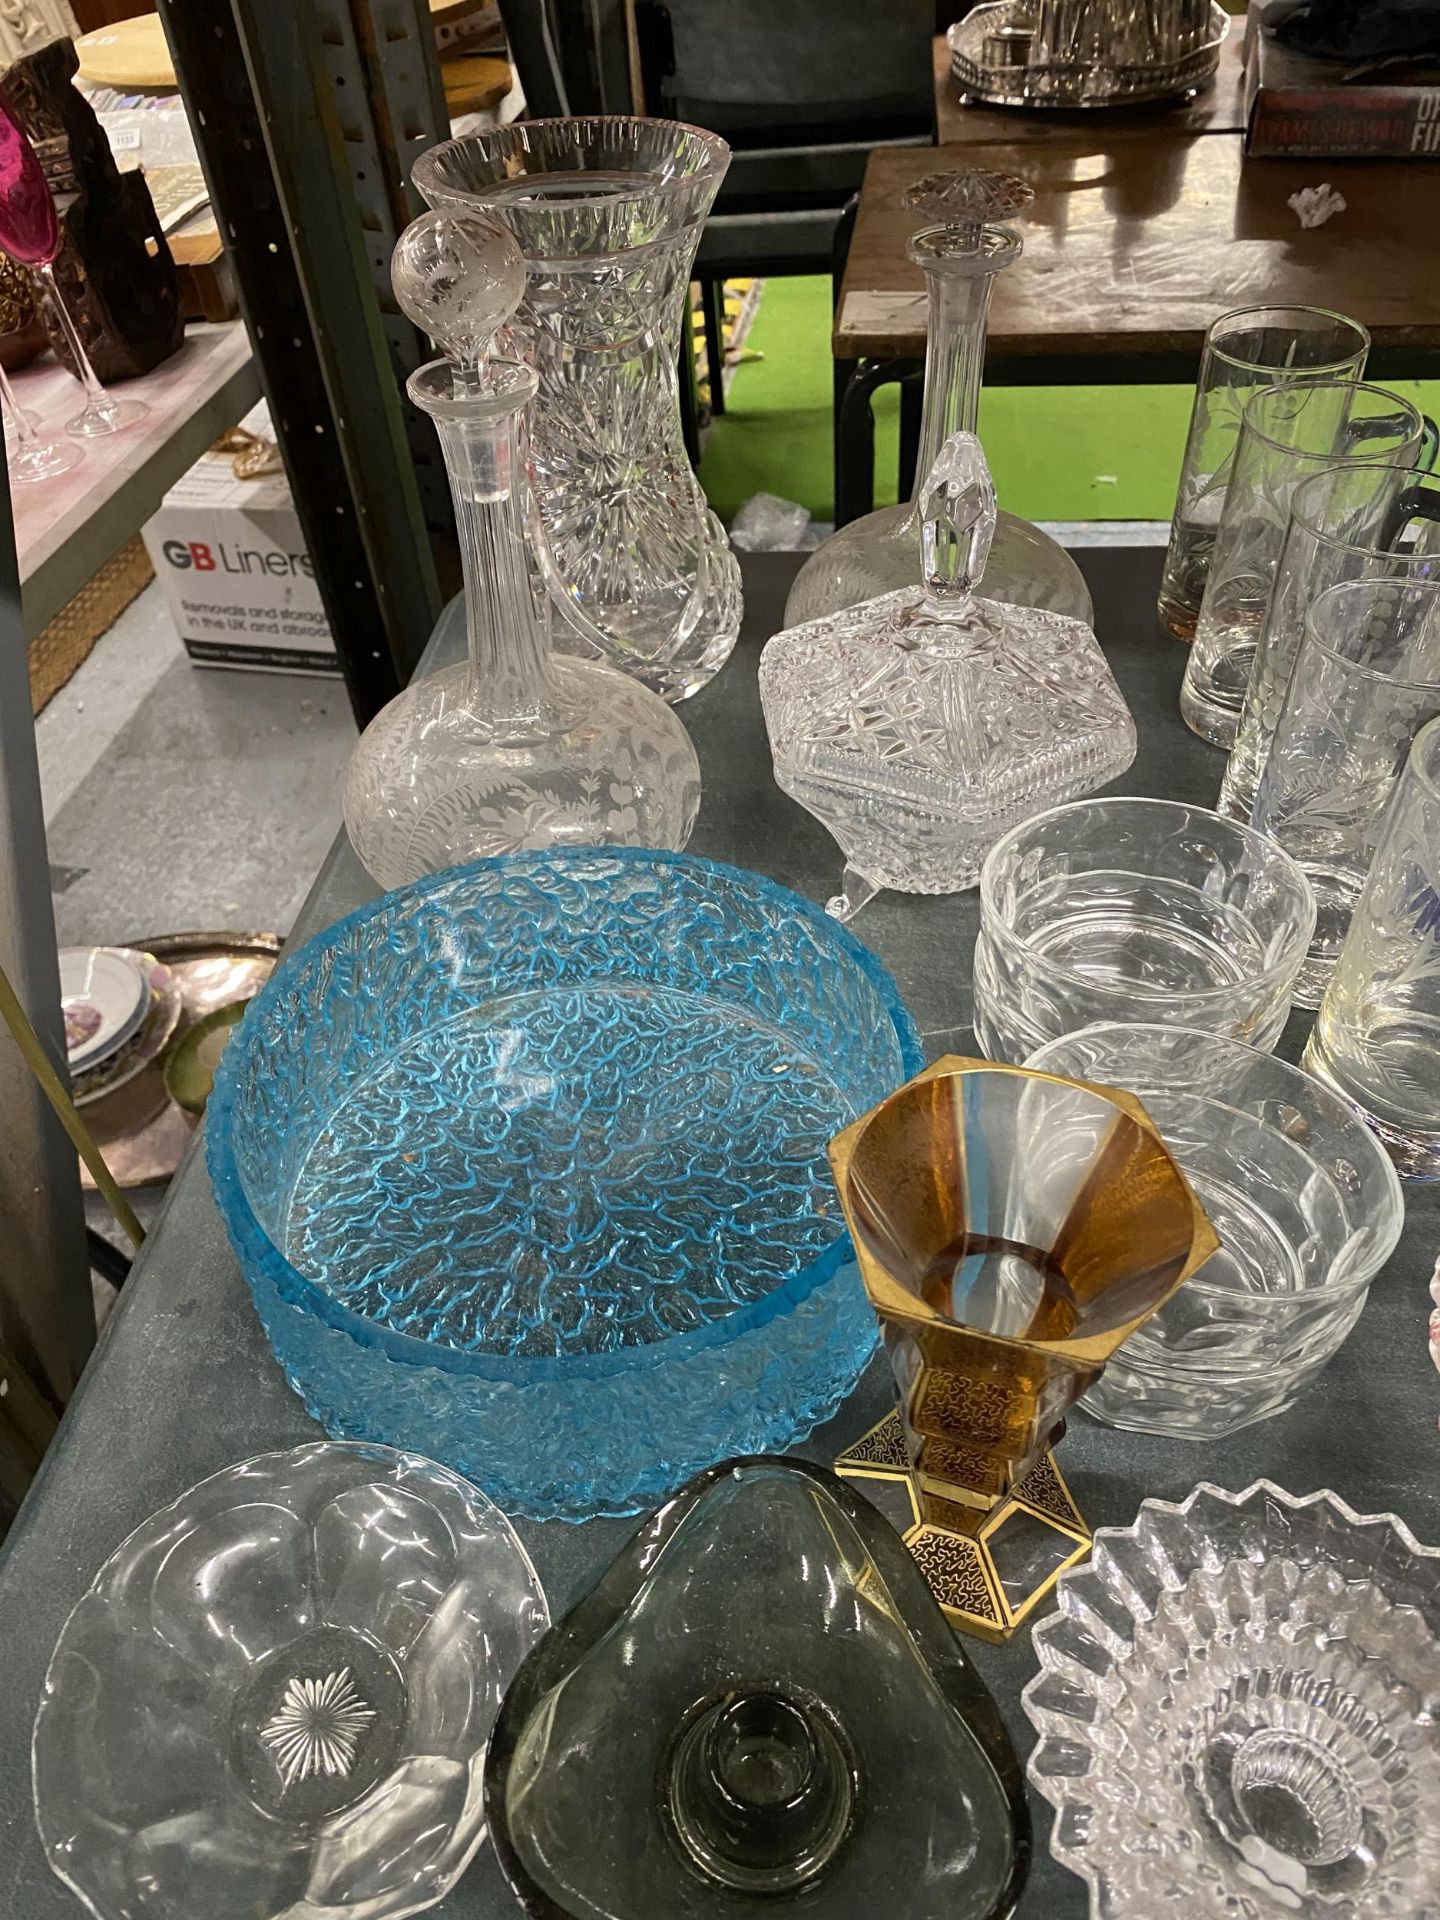 A LARGE QUANTITY OF GLASSWARE TO INCLUDE VASES, DECANTERS, BOWLS, GLASSES, ETC - Image 2 of 3